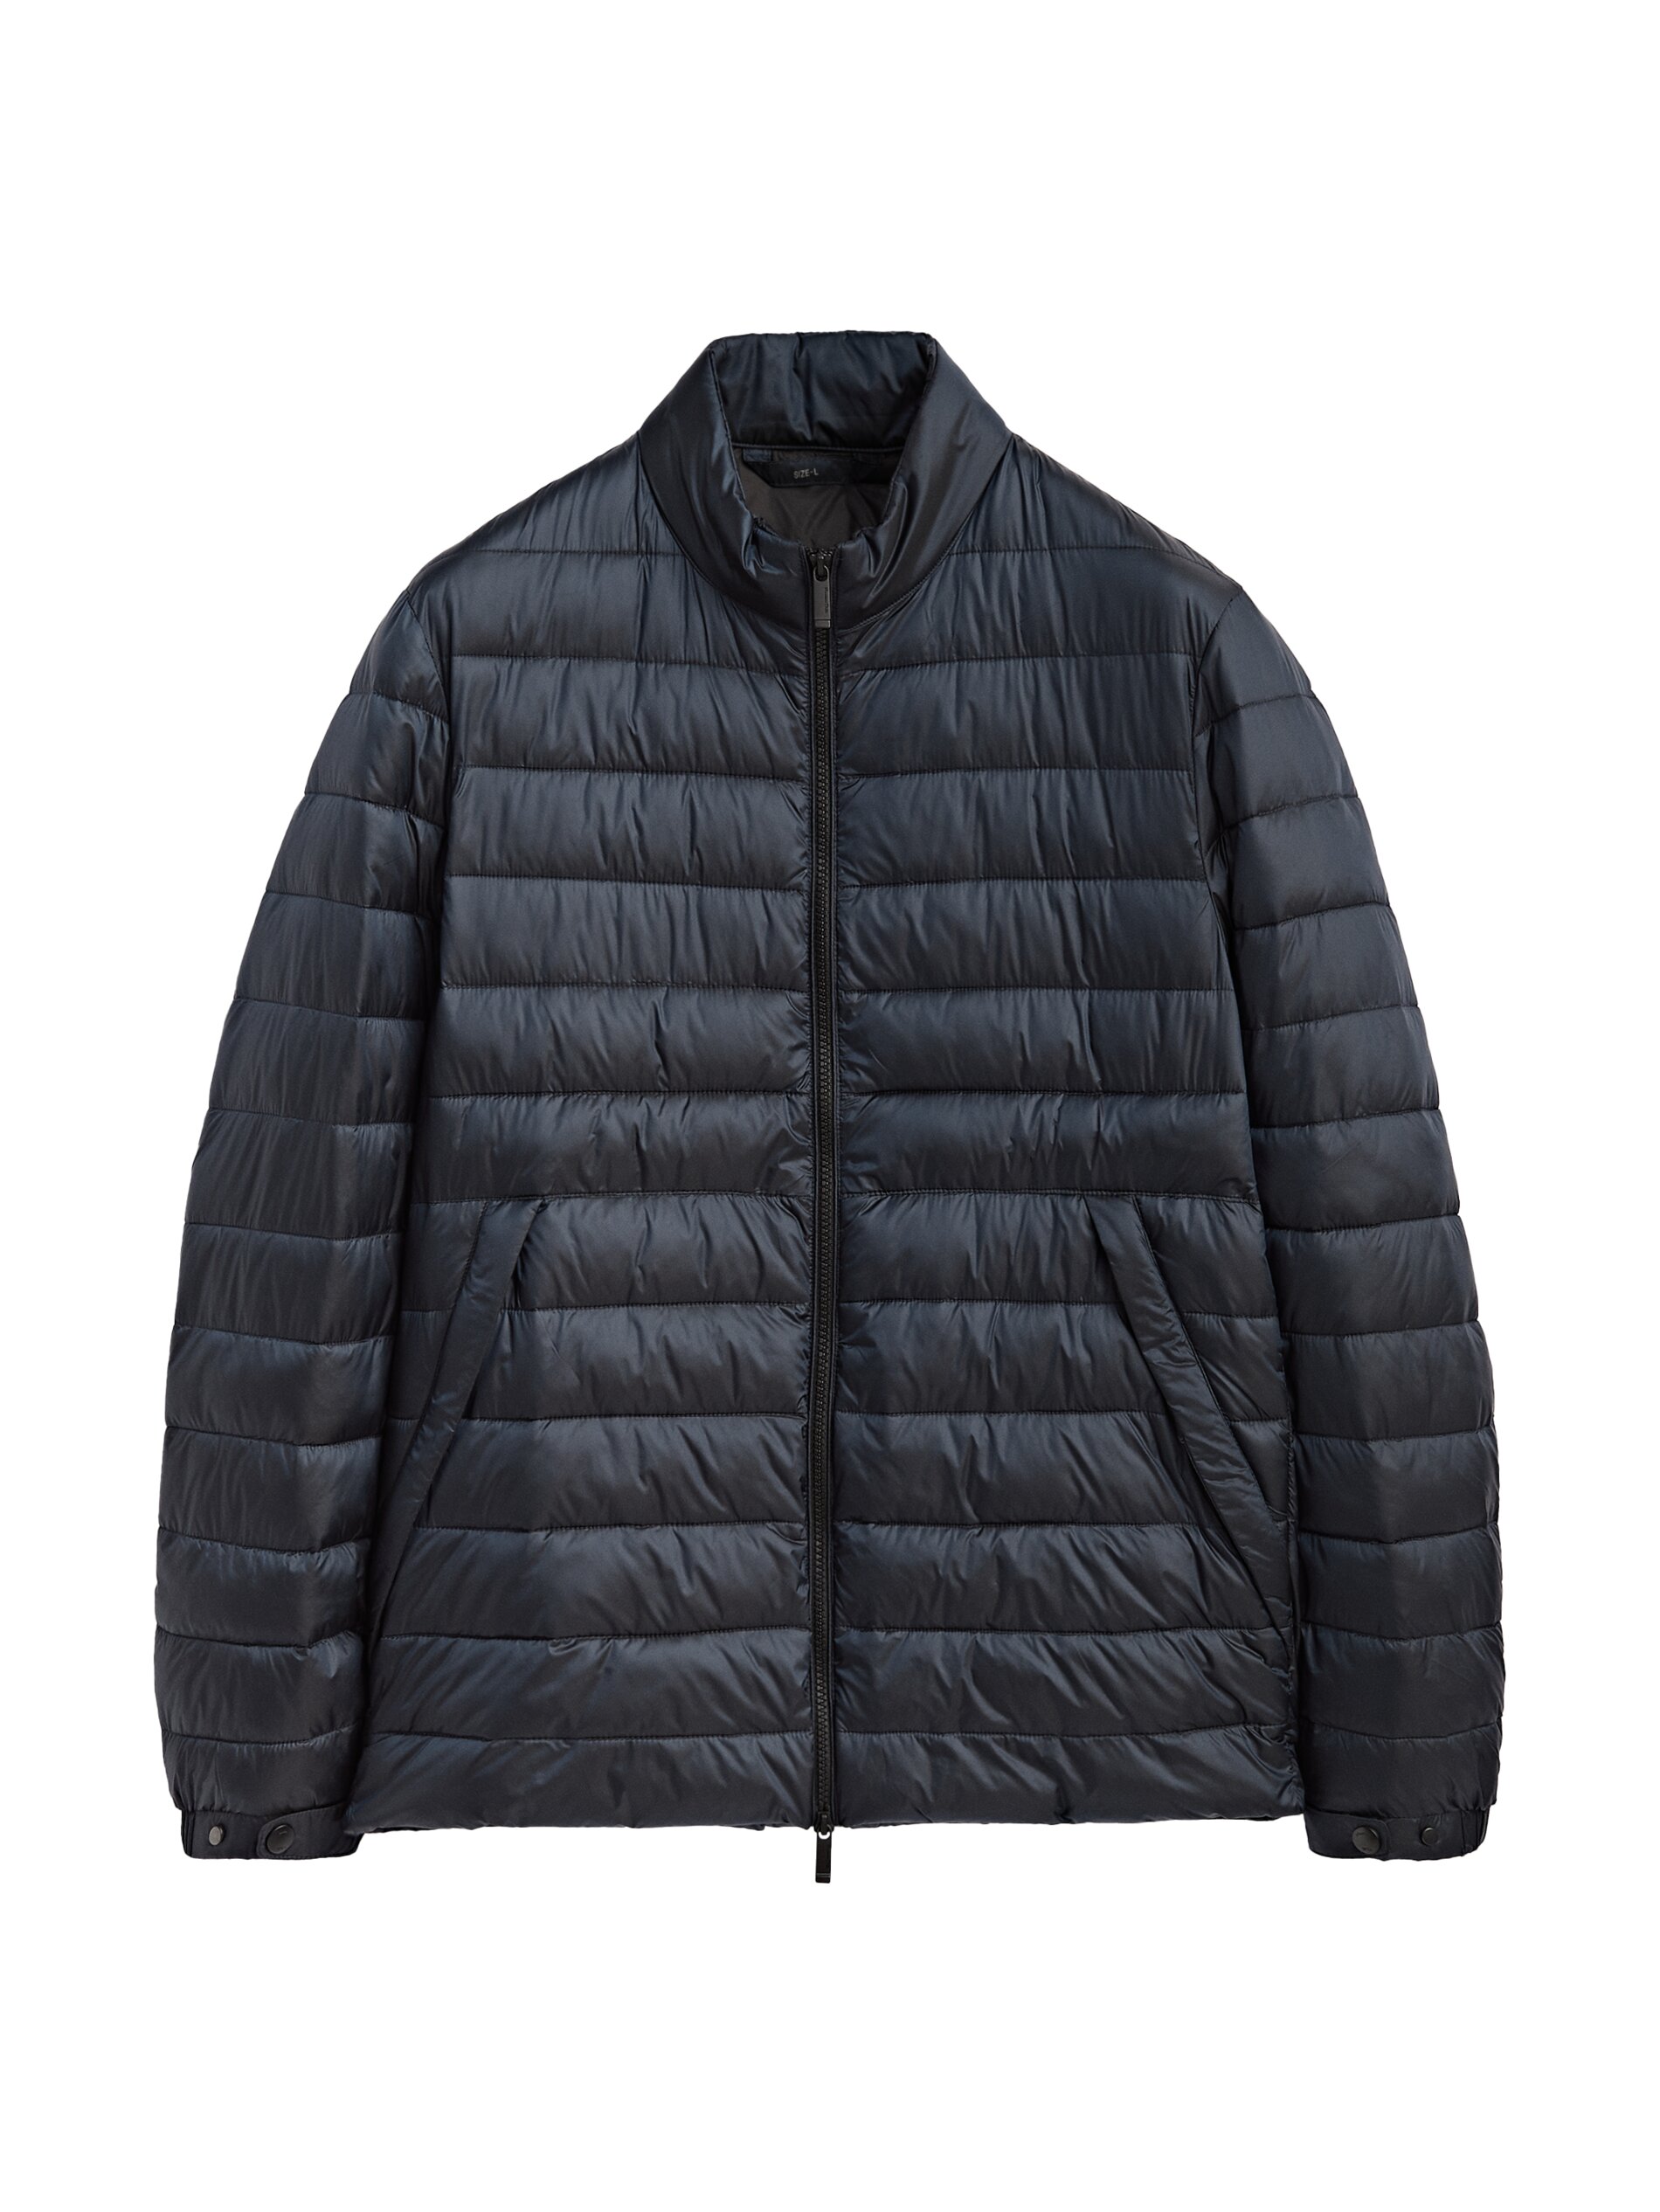 Puffer jacket with contrast knit sleeves - Massimo Dutti Malta